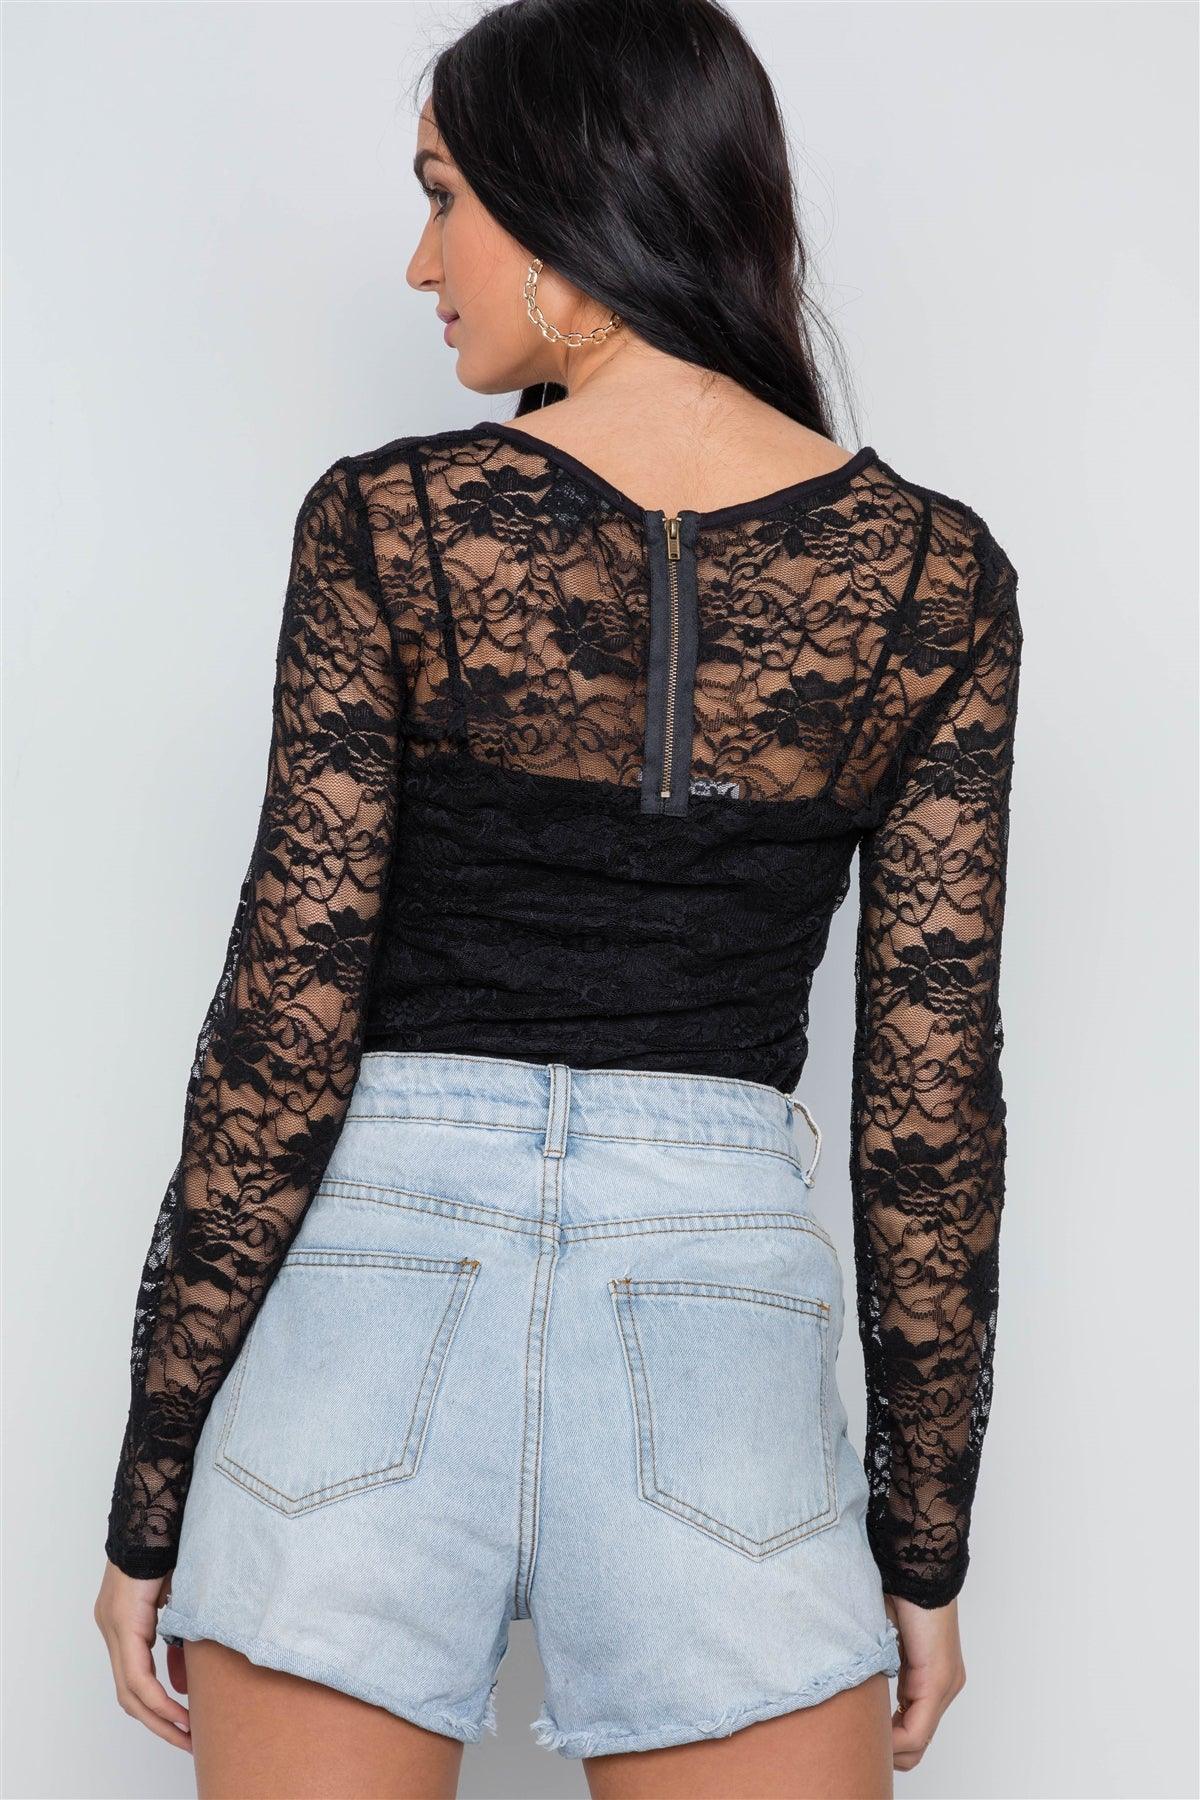 Black Sheer Floral Lace Long Sleeve Top /2-2-2